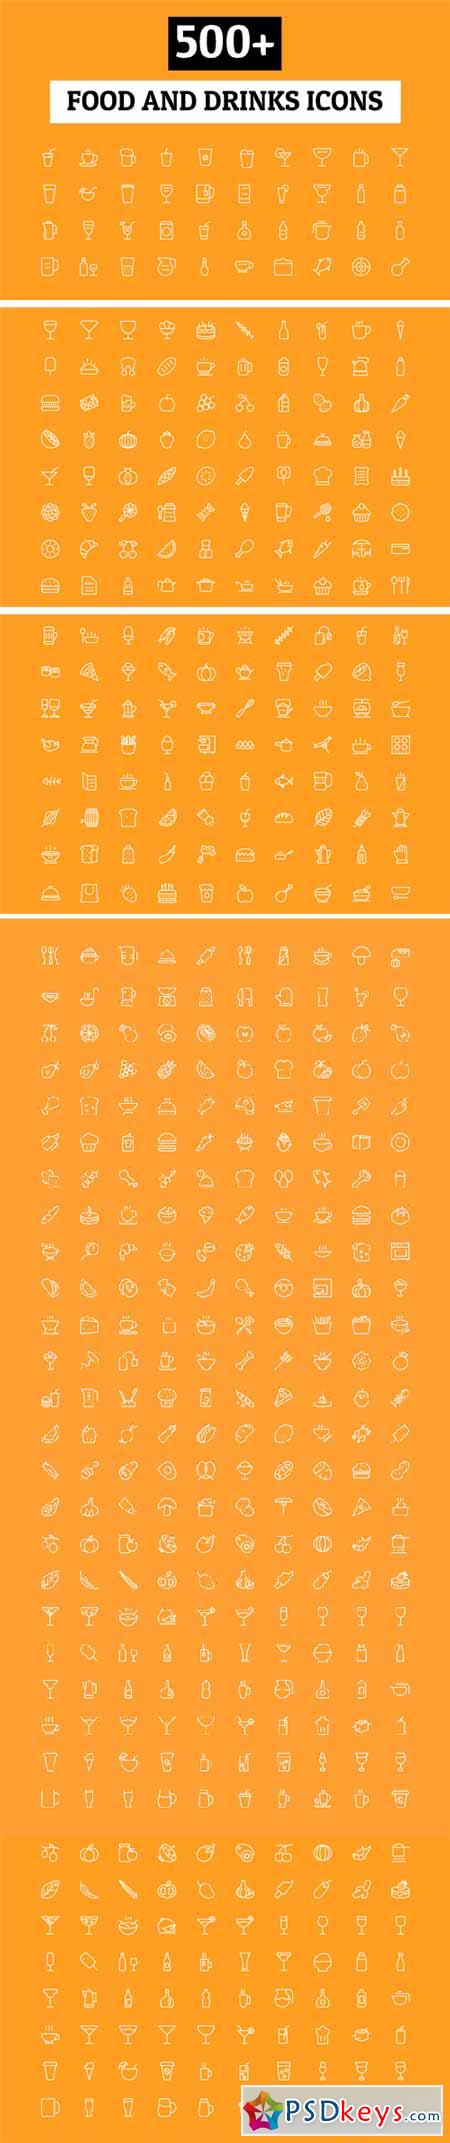 500+ Food and Drinks Icons 243055